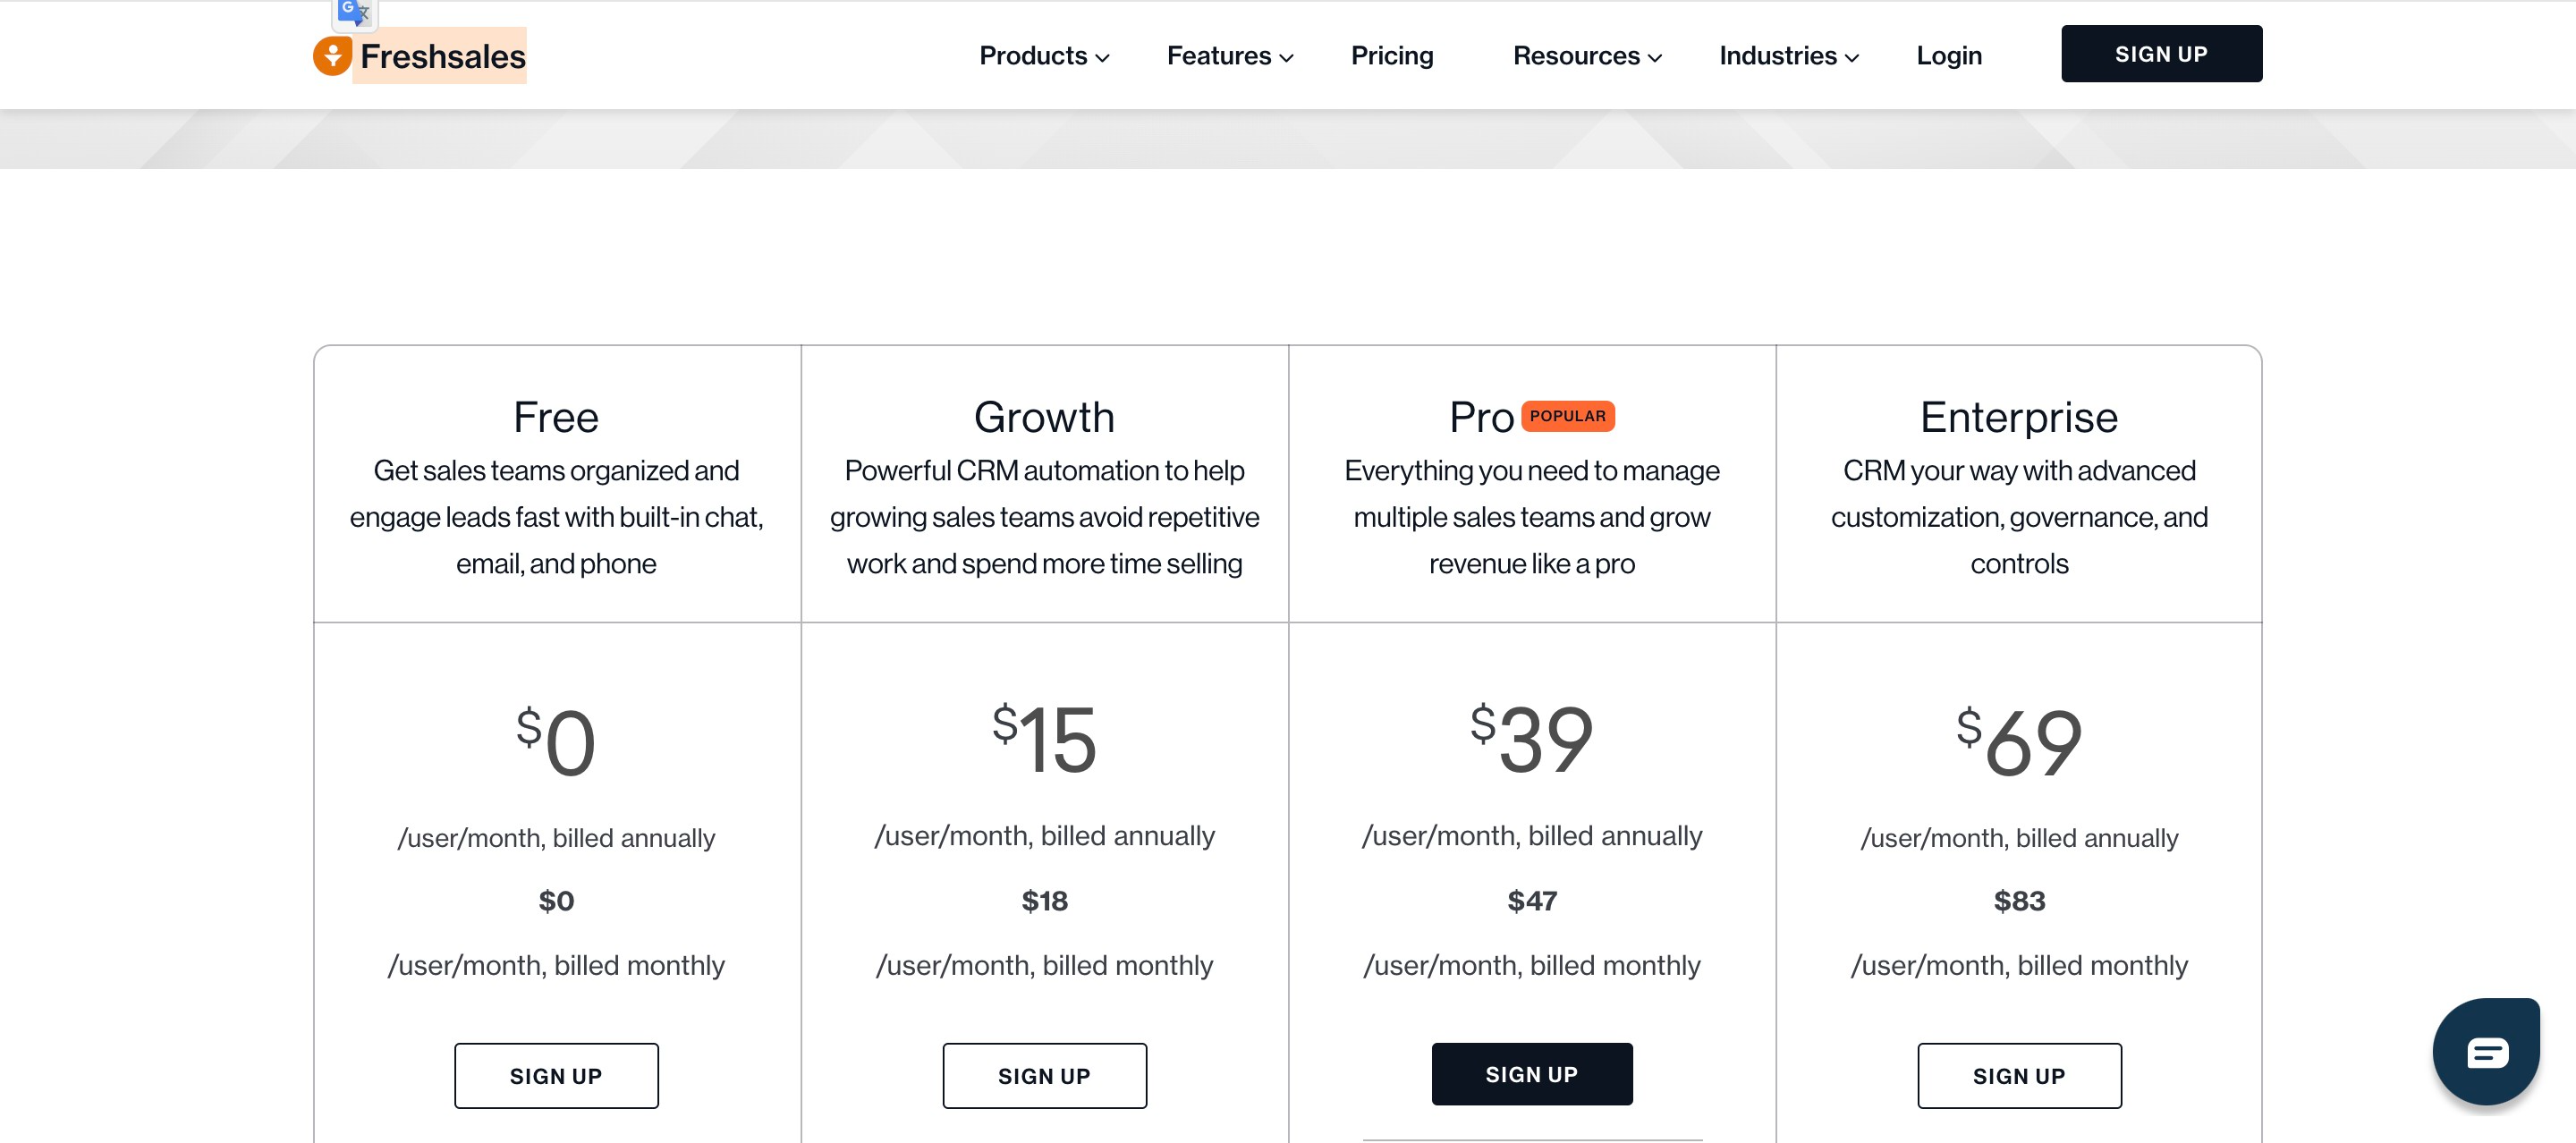 CRM for Digital Marketing: Pricing of Freshsales